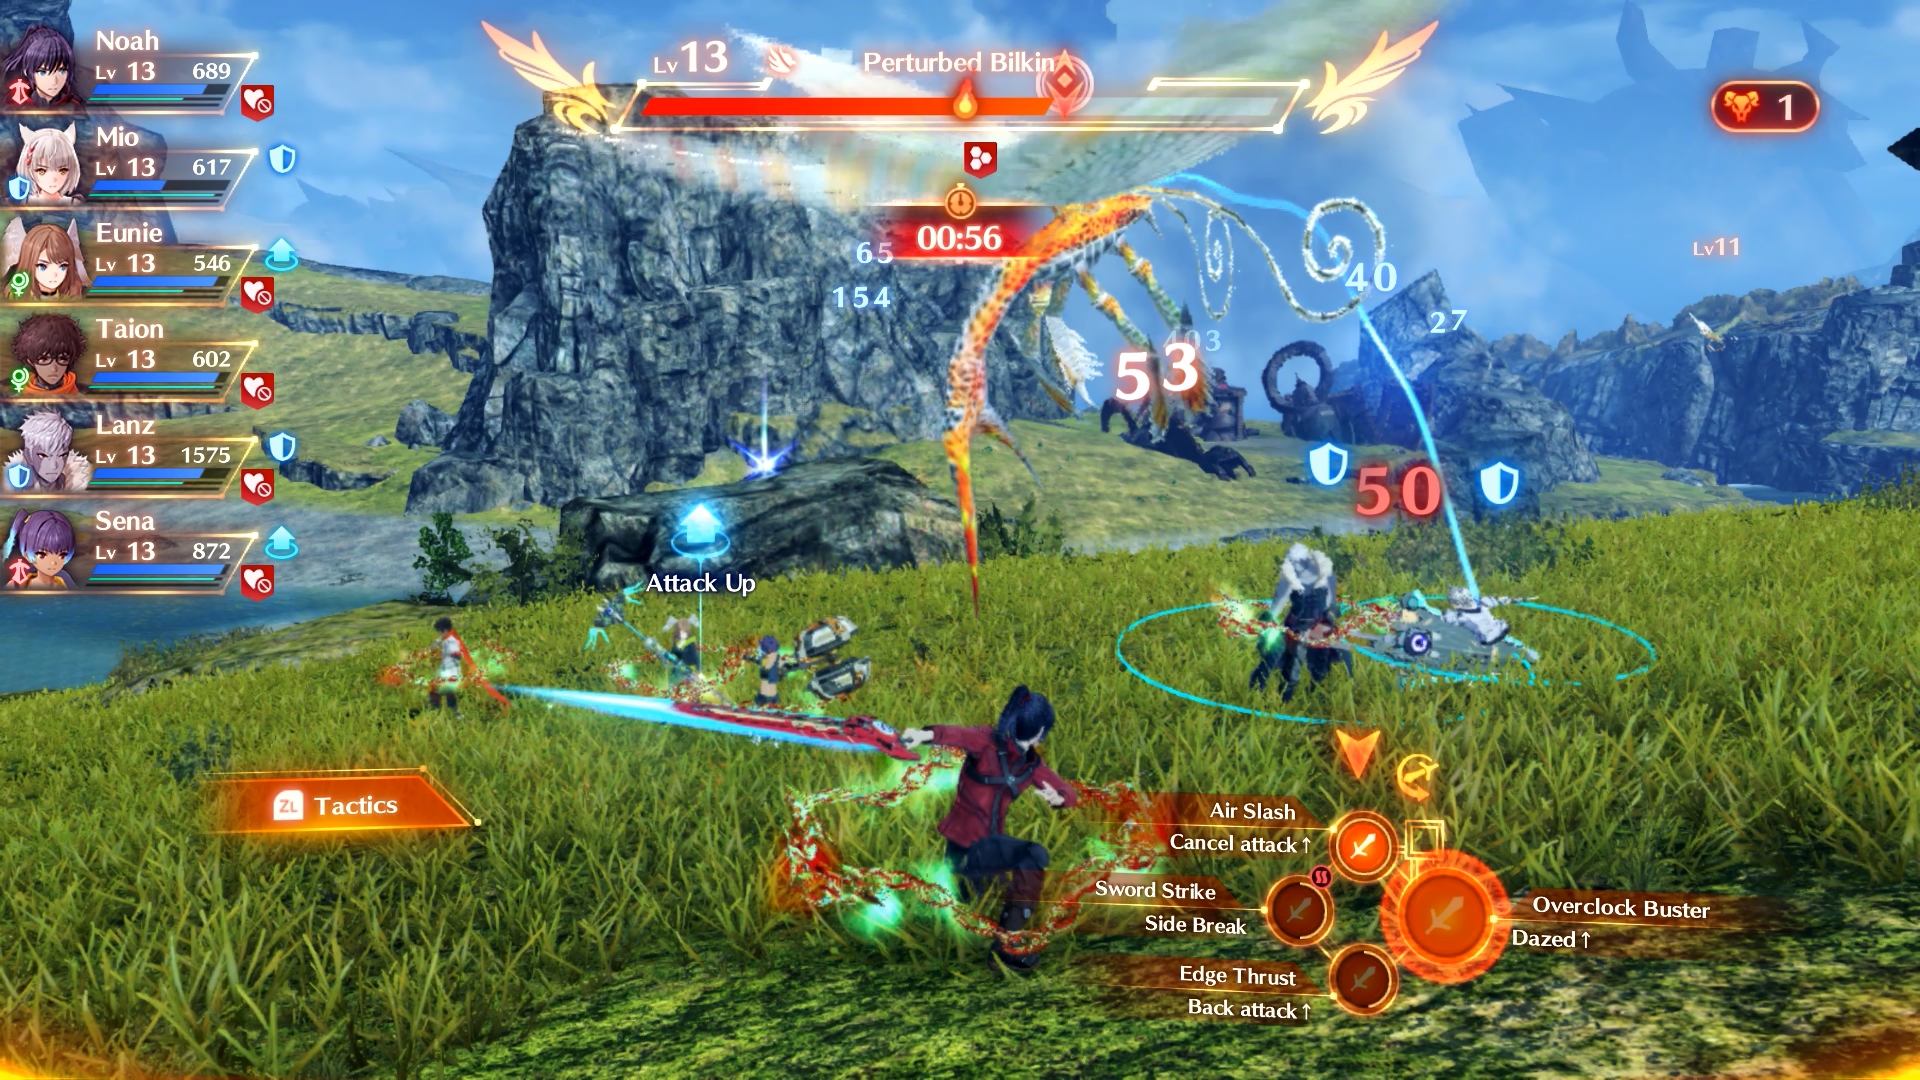 Xenoblade Chronicles 3 Battle System Guide: Arts, Combos and More Explained  - CNET